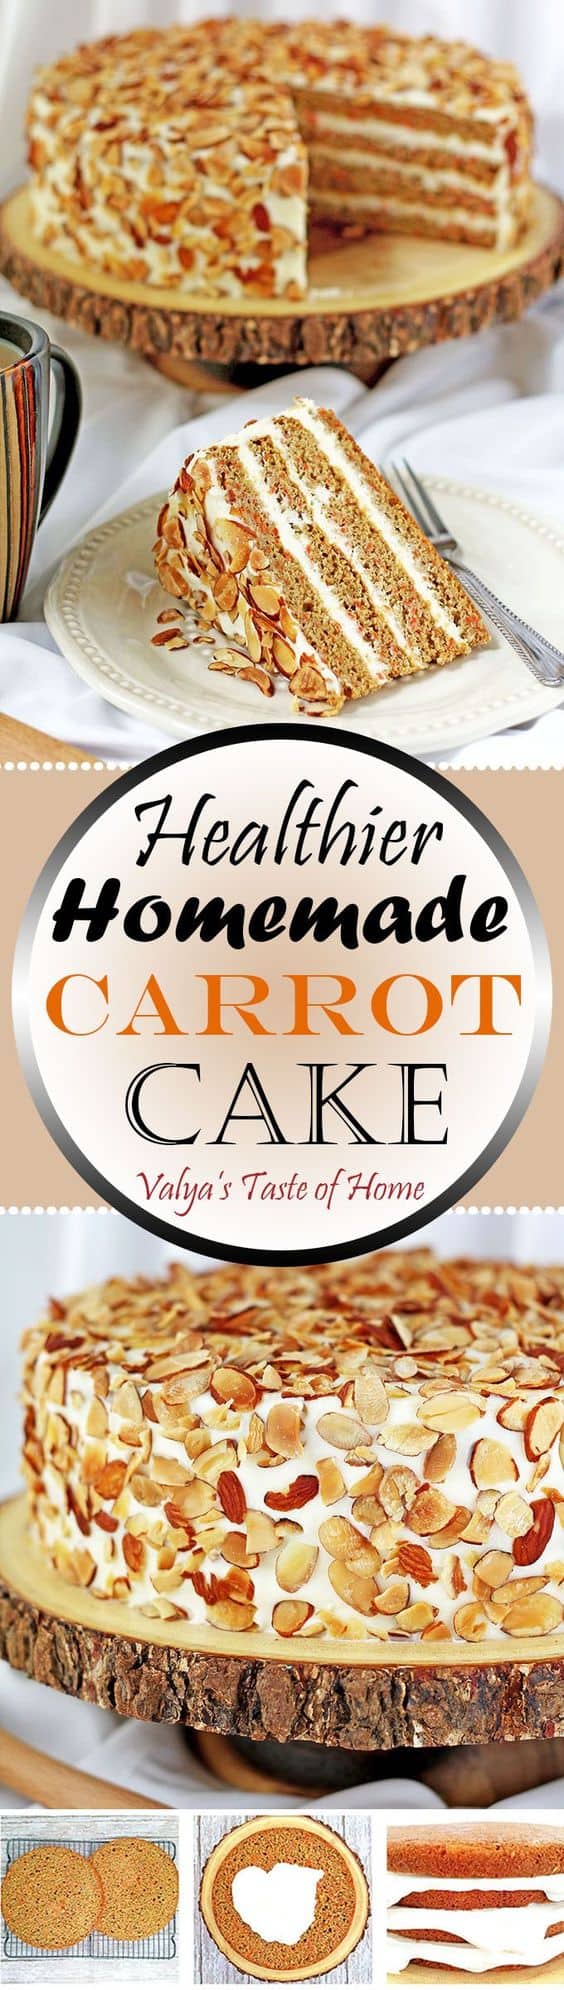 This Healthier Homemade Carrot Cake recipe is my very own made-up recipe; a baker's creation. The Greek yogurt adds that deliciously sour offsetting taste to the sweet buttercream frosting. Toasted almond chips finish that irresistible tasty slice of cake, which goes wonderfully with a cup of tea or coffee. #healthiercarrotcake #fallbaking #cleaneating #valyastasteofhome